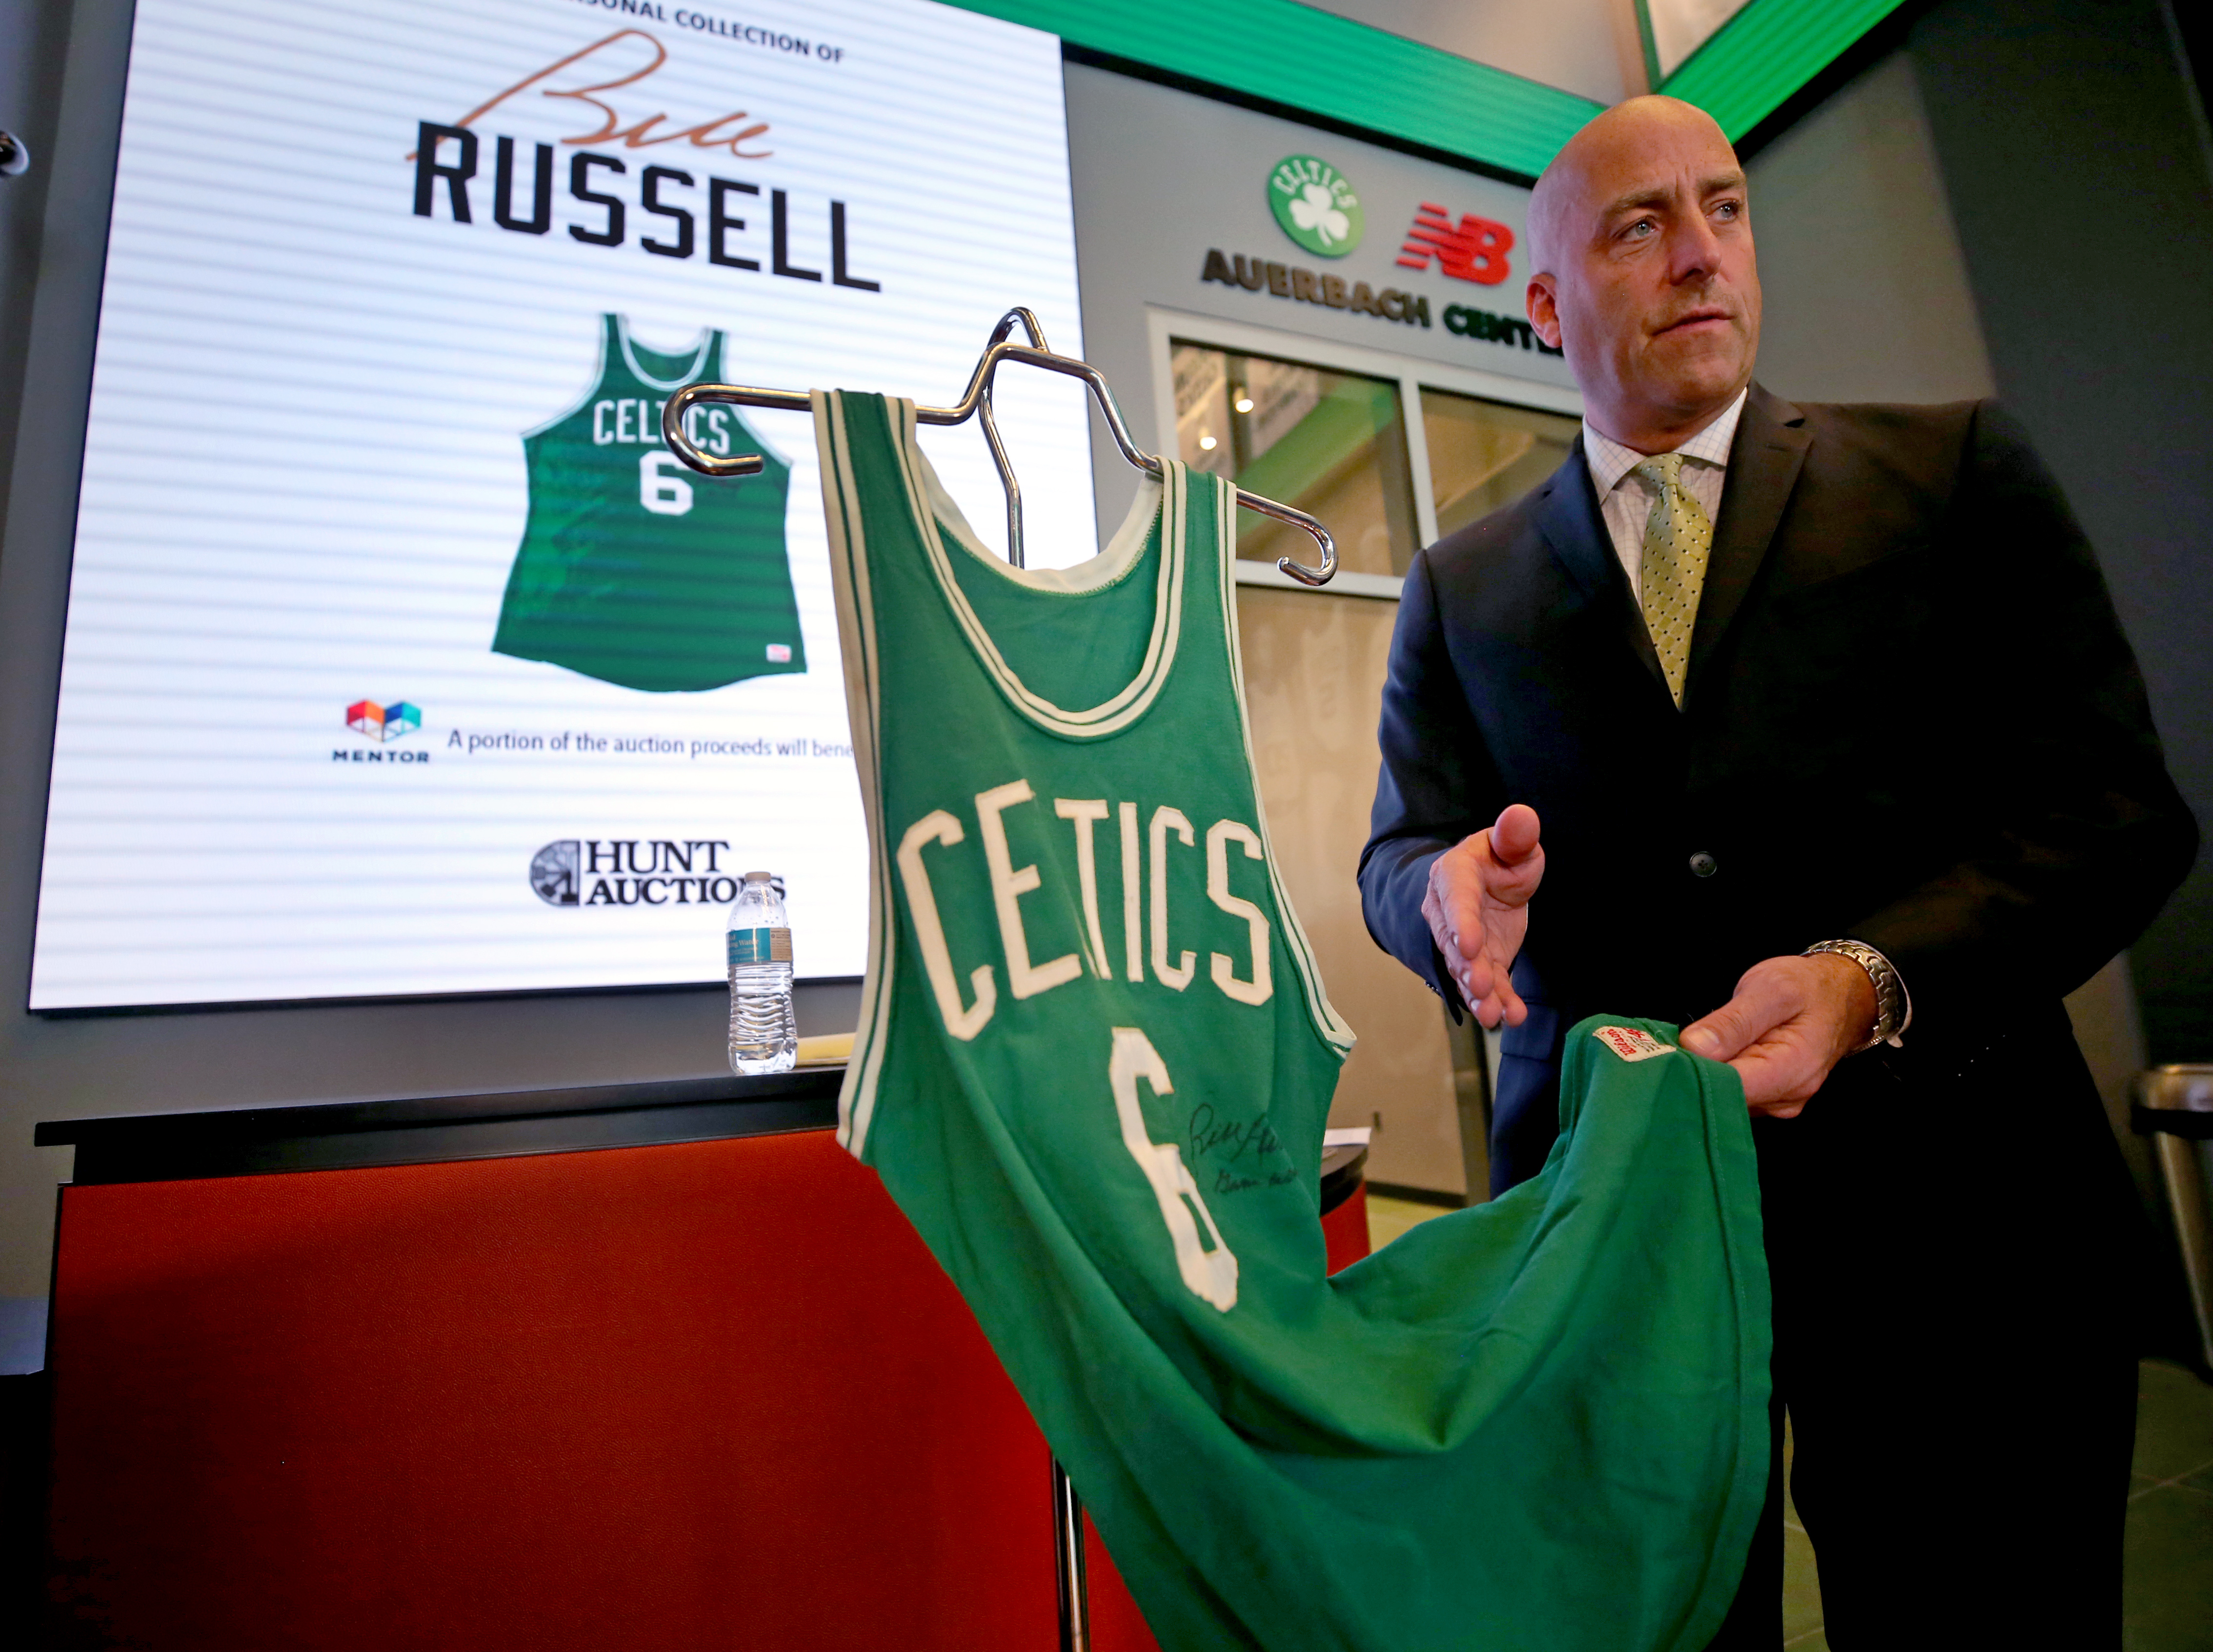 Historic auction of Bill Russell memorabilia is culmination of